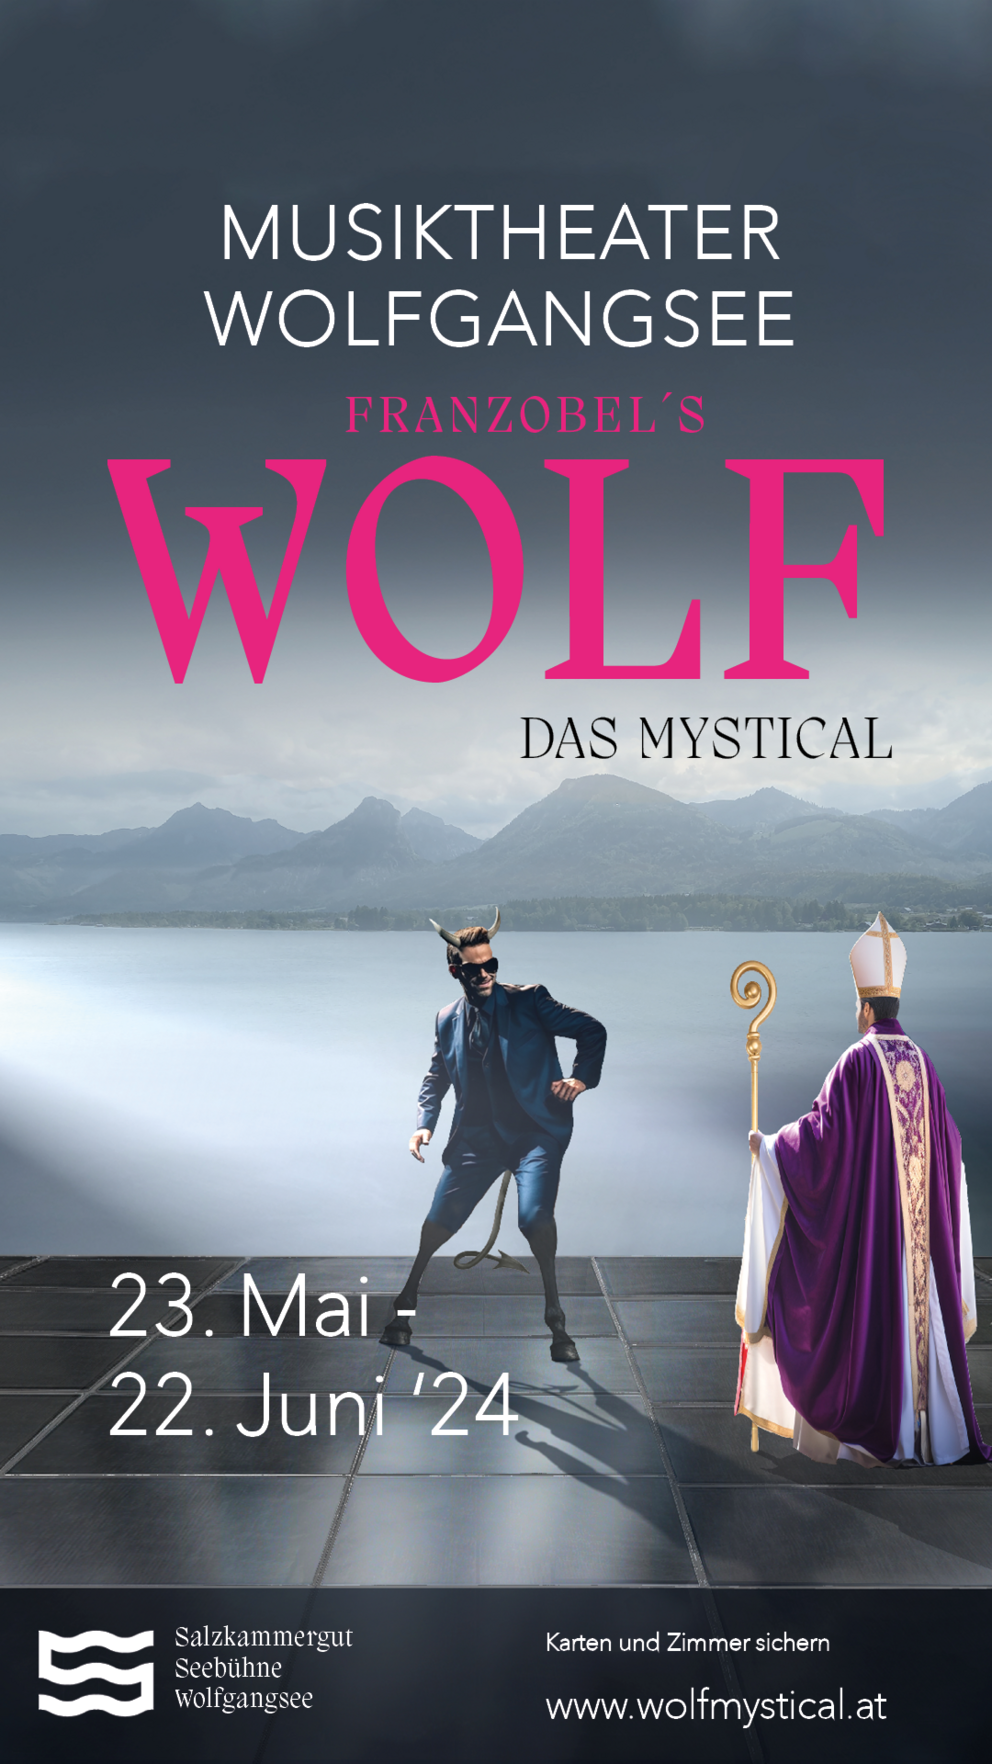 The advertising poster for the music theatre at Lake Wolfgangsee "Franzobel's Wolf the Mystical".